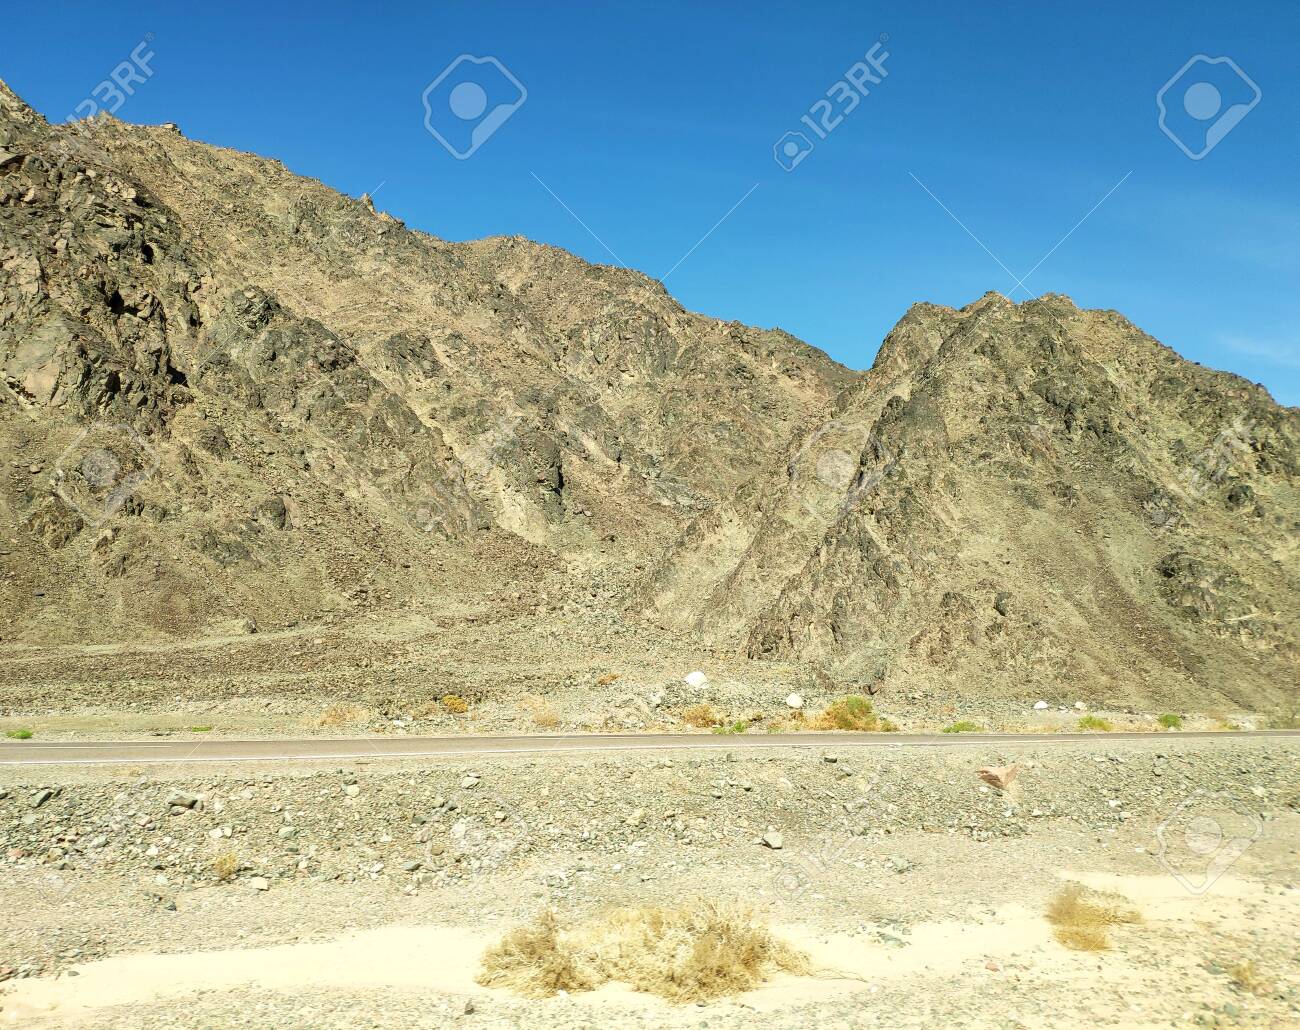 Sinai Desert Backgound With Mountains And Hills Landscape